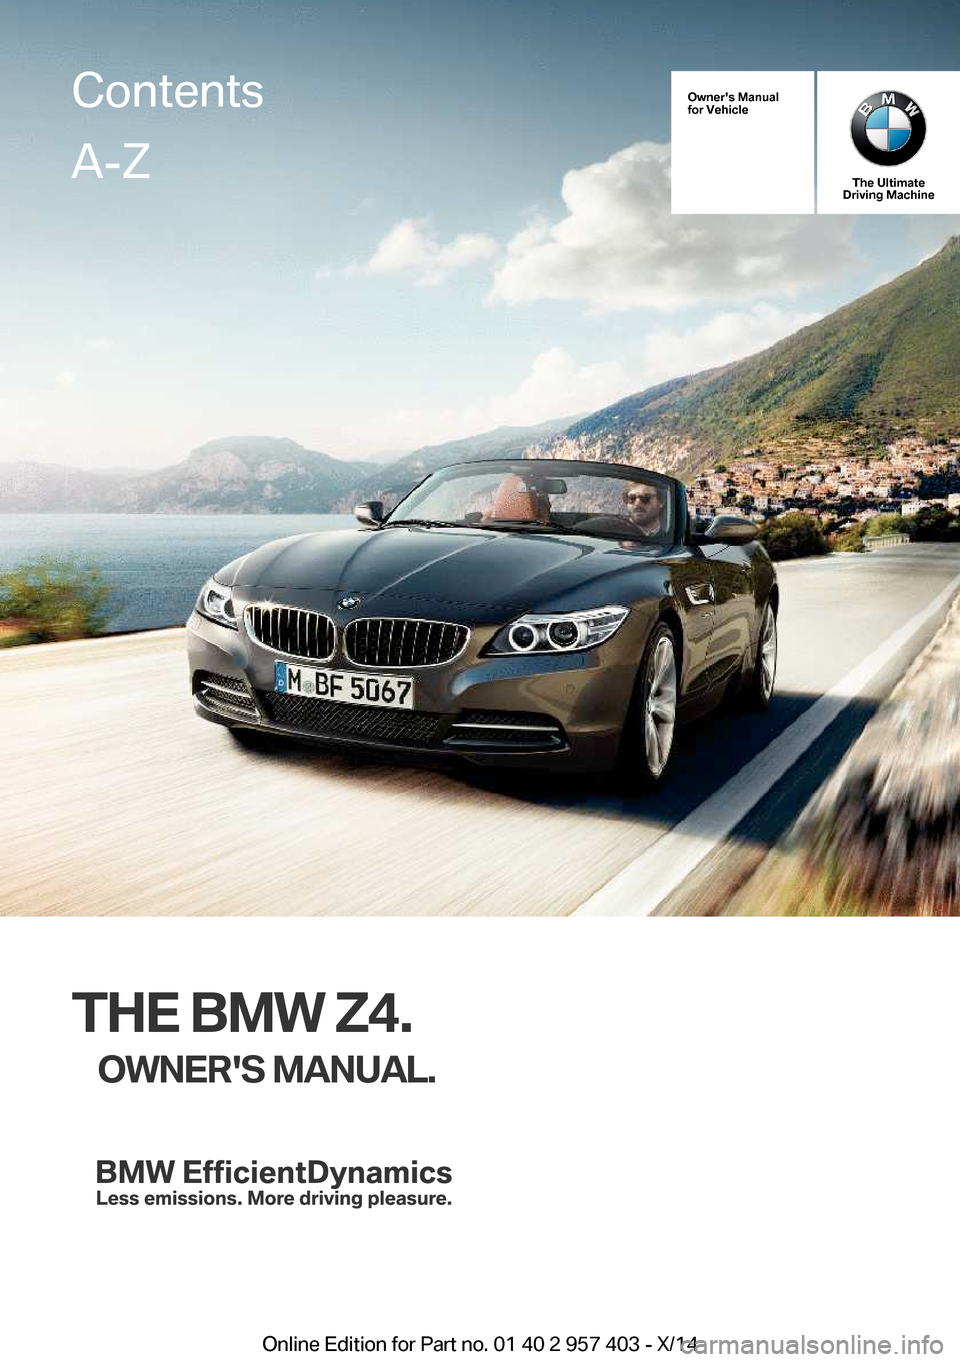 BMW Z4 2016 E89 Owners Manual Owners Manual
for Vehicle
The Ultimate
Driving Machine
THE BMW Z4.
OWNERS MANUAL.
ContentsA-Z
Online Edition for Part no. 01 40 2 957 403 - X/14   